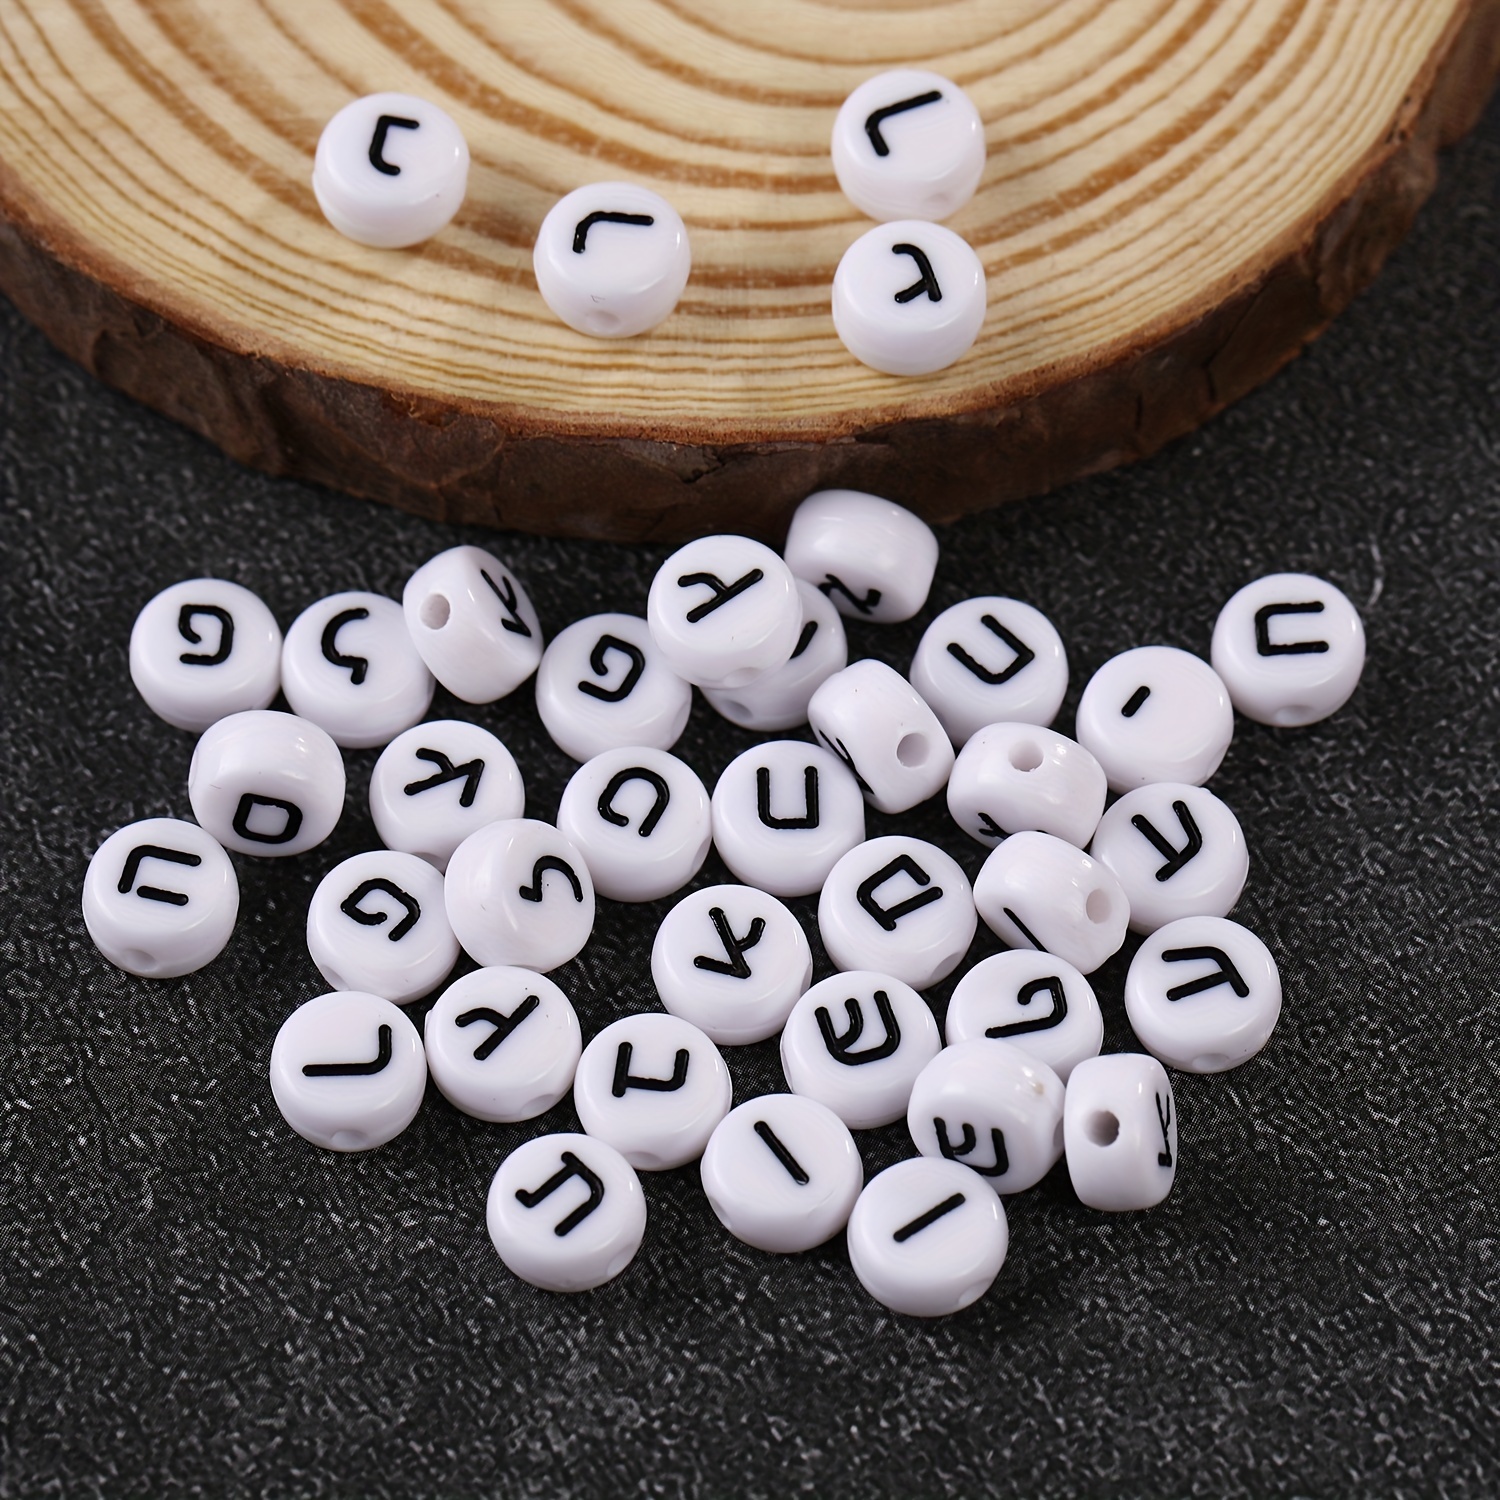 

100pcs 7mm Oval Acrylic Hebrew Letter Beads - Loose Spacer Beads For Diy Jewelry Making, Bracelets & Necklaces Craft Supplies